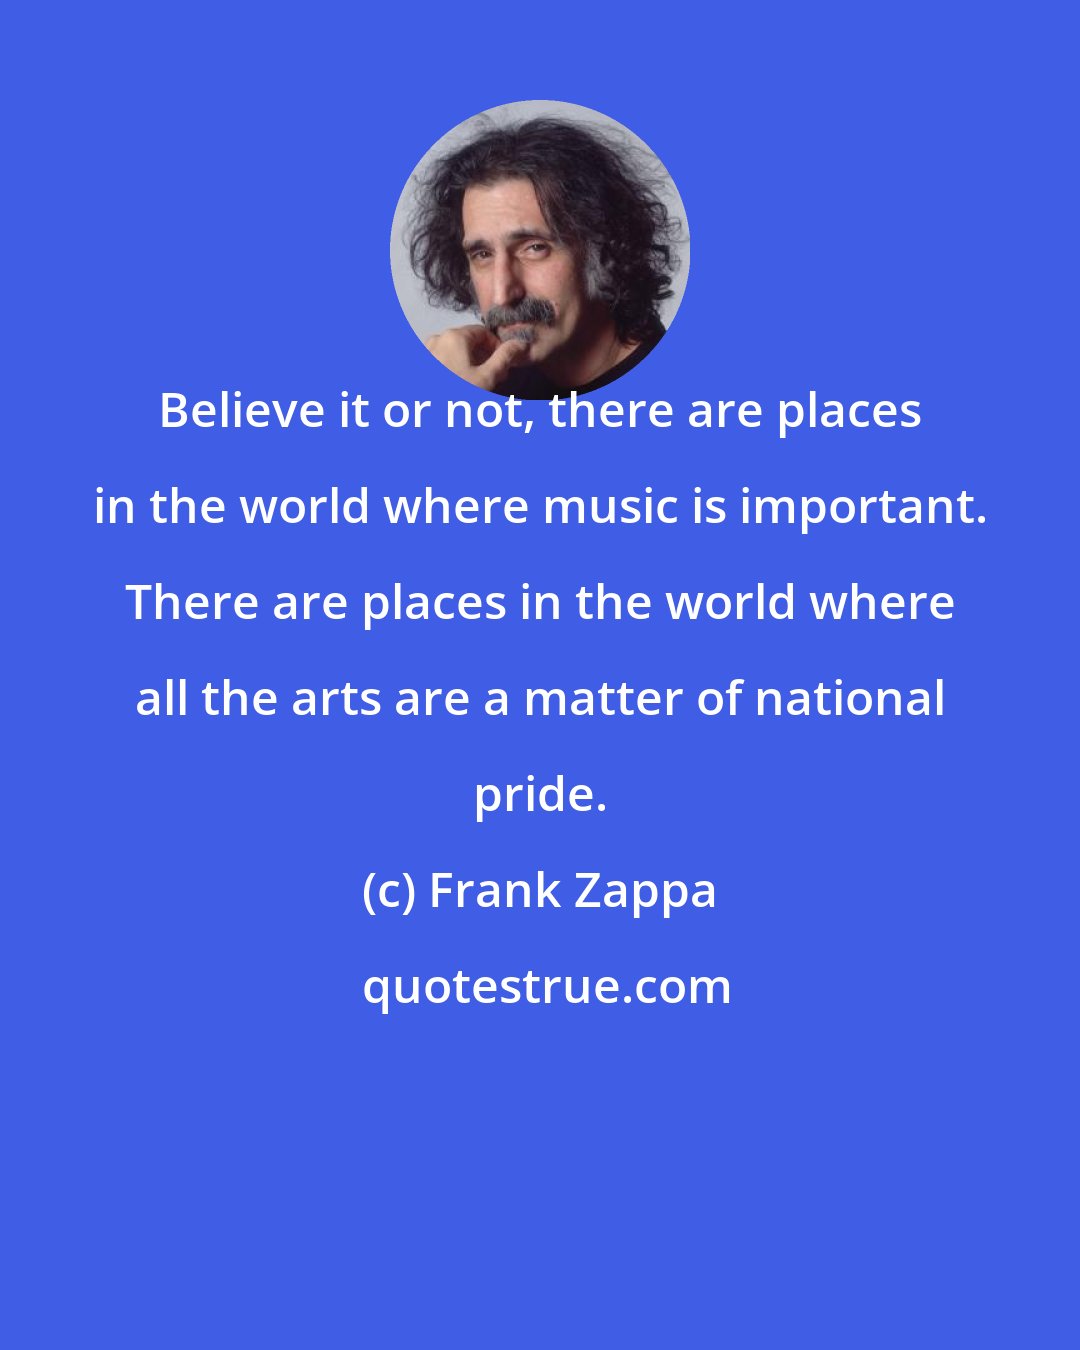 Frank Zappa: Believe it or not, there are places in the world where music is important. There are places in the world where all the arts are a matter of national pride.